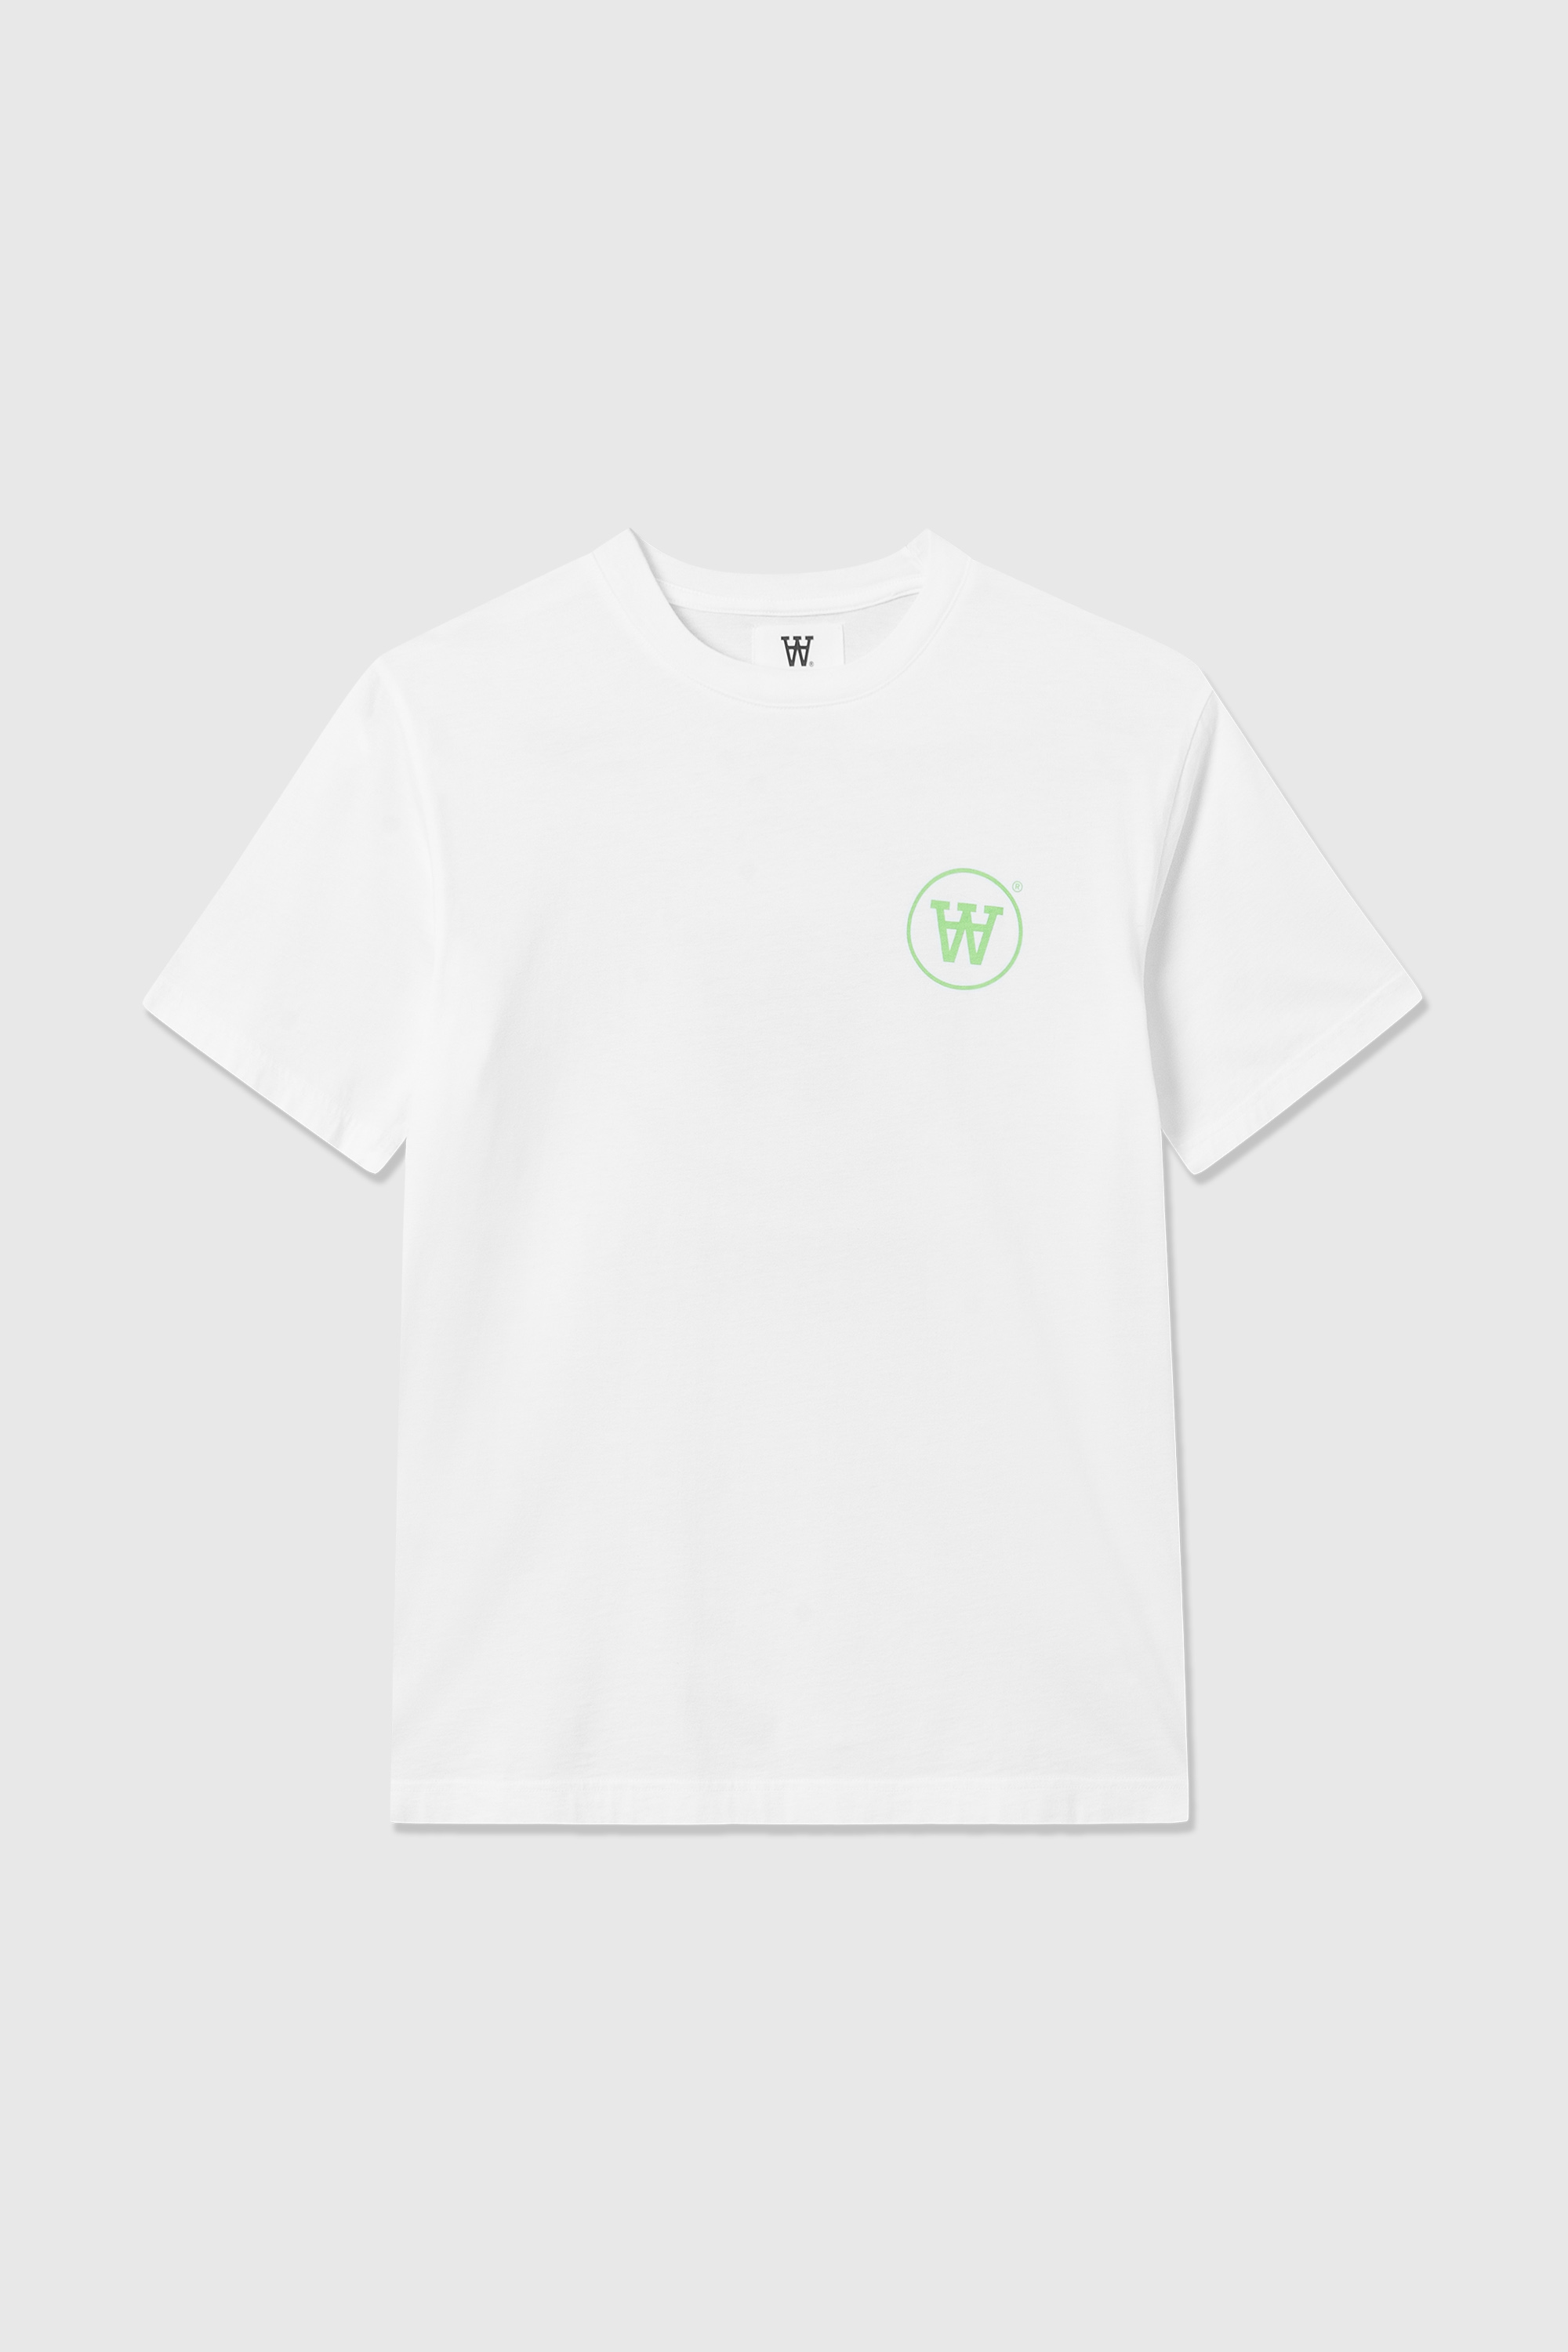 Double A by Wood Wood Ace T-shirt White/green print | WoodWood.com